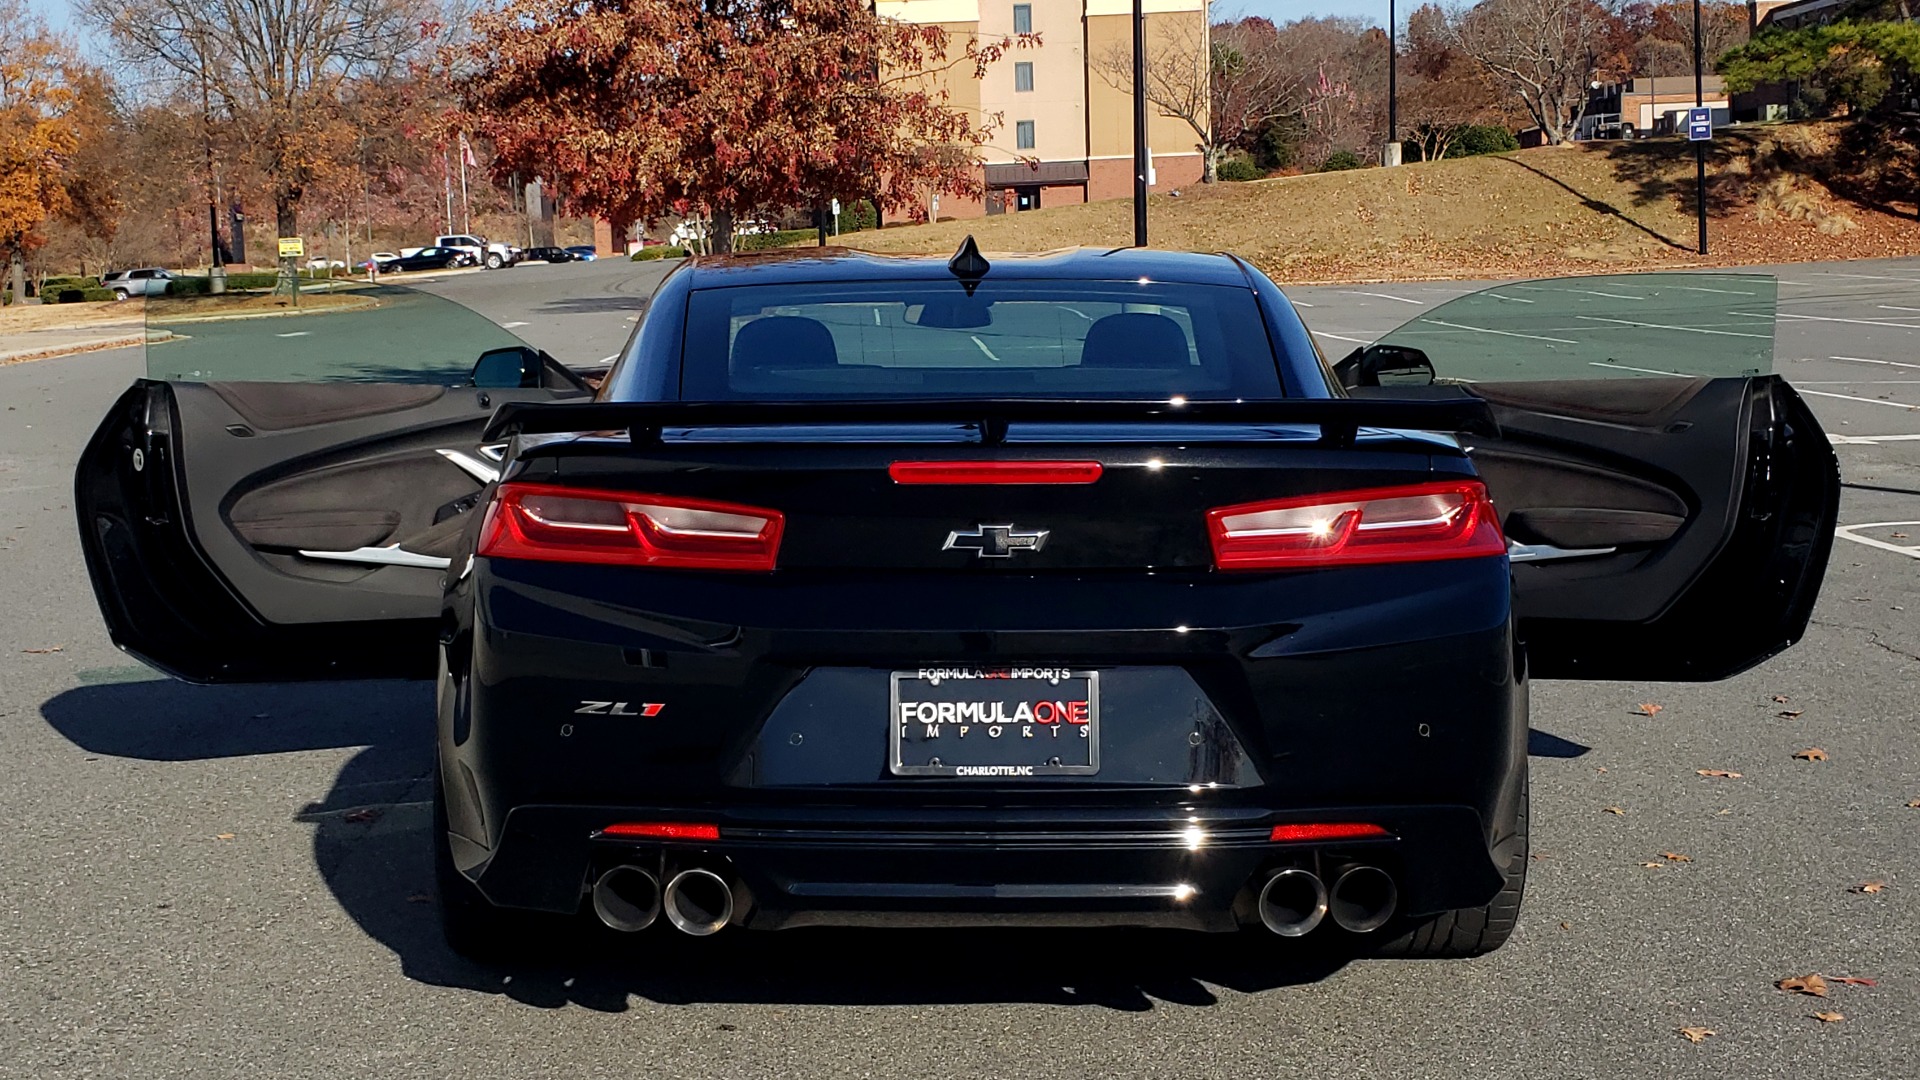 Used 2017 Chevrolet CAMARO ZL1 COUPE / 6.2L SC LT4 V8 (650HP) / 6-SPD MAN / NAV / BOSE / REARVIEW for sale $58,995 at Formula Imports in Charlotte NC 28227 36